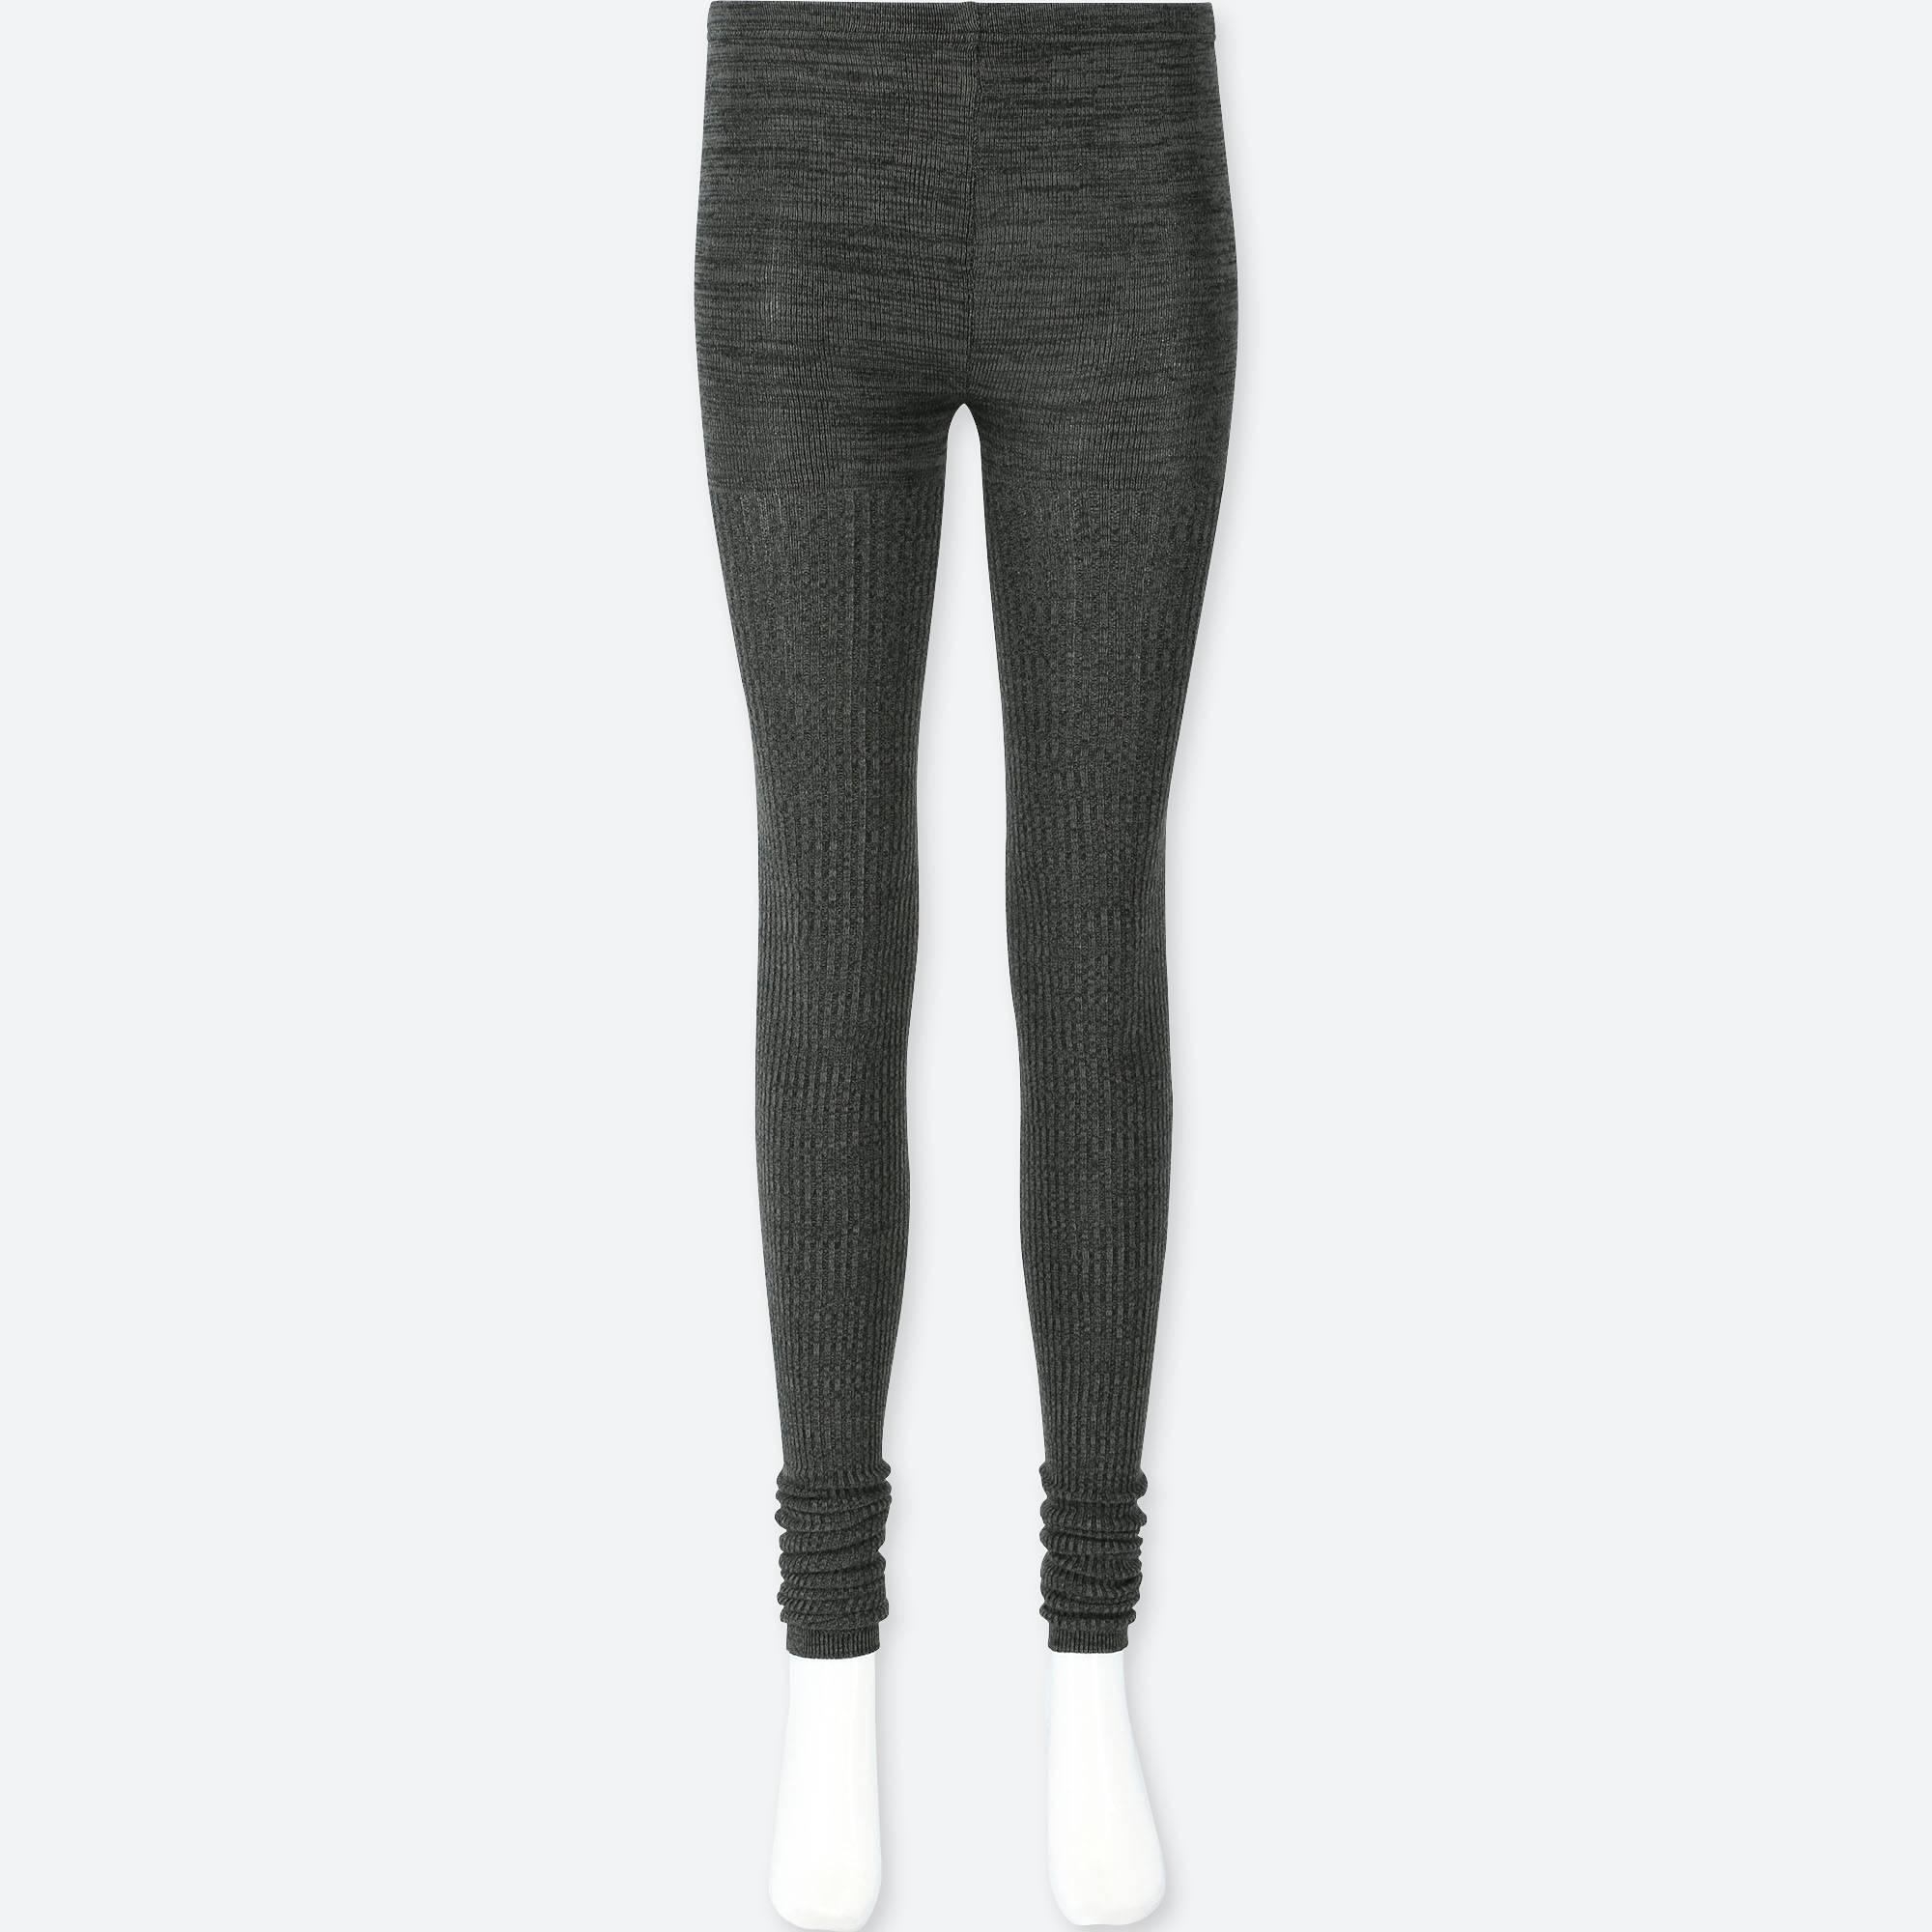 Download Lyst - Uniqlo Women Heattech Knitted Ribbed Mélange ...